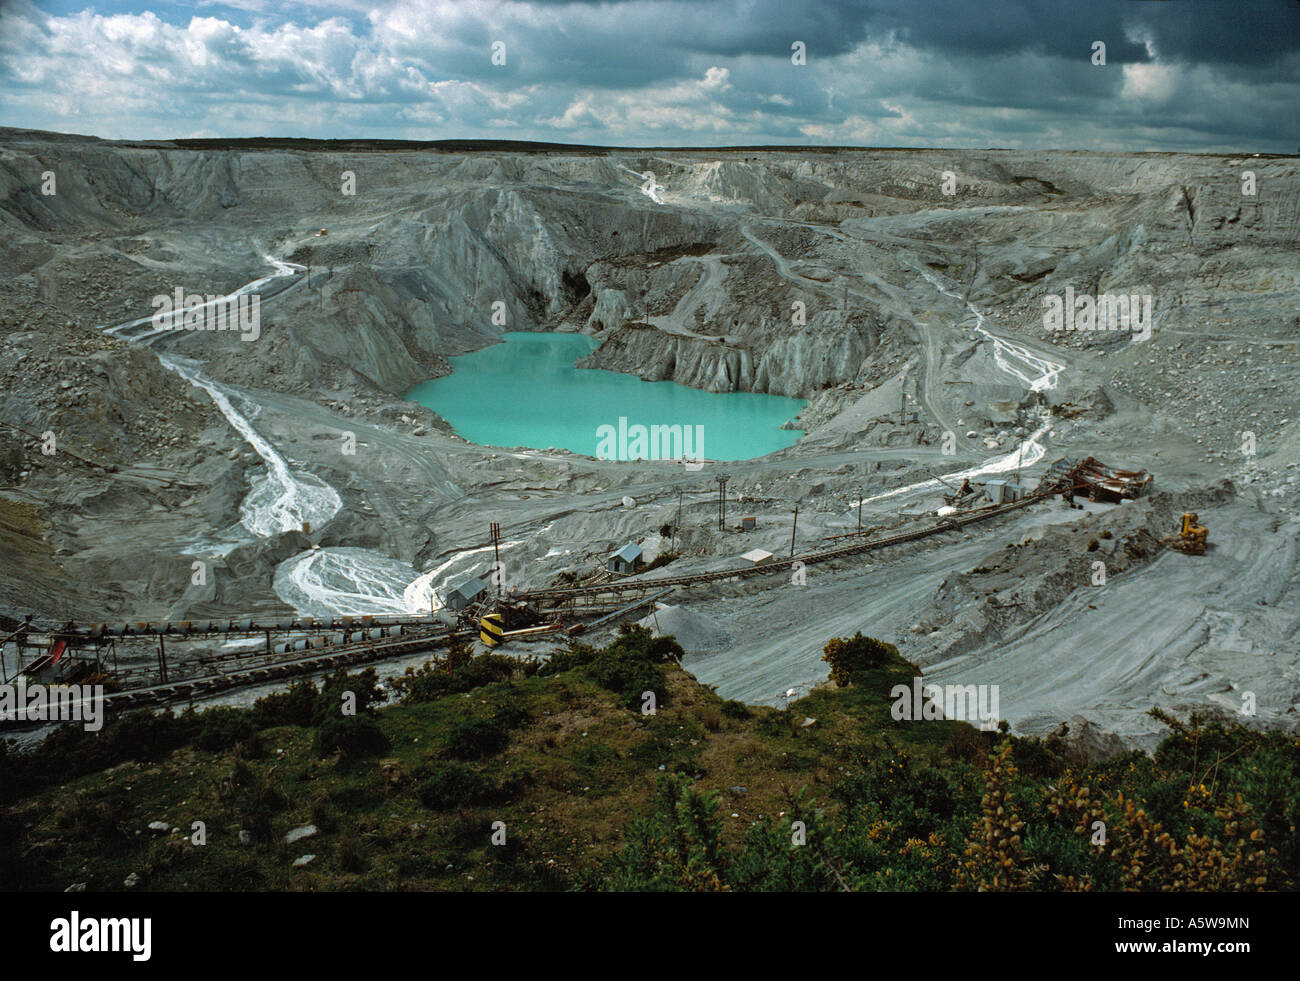 china-clay-pit-near-st-austell-cornwall-england-late-70s-A5W9MN.jpg